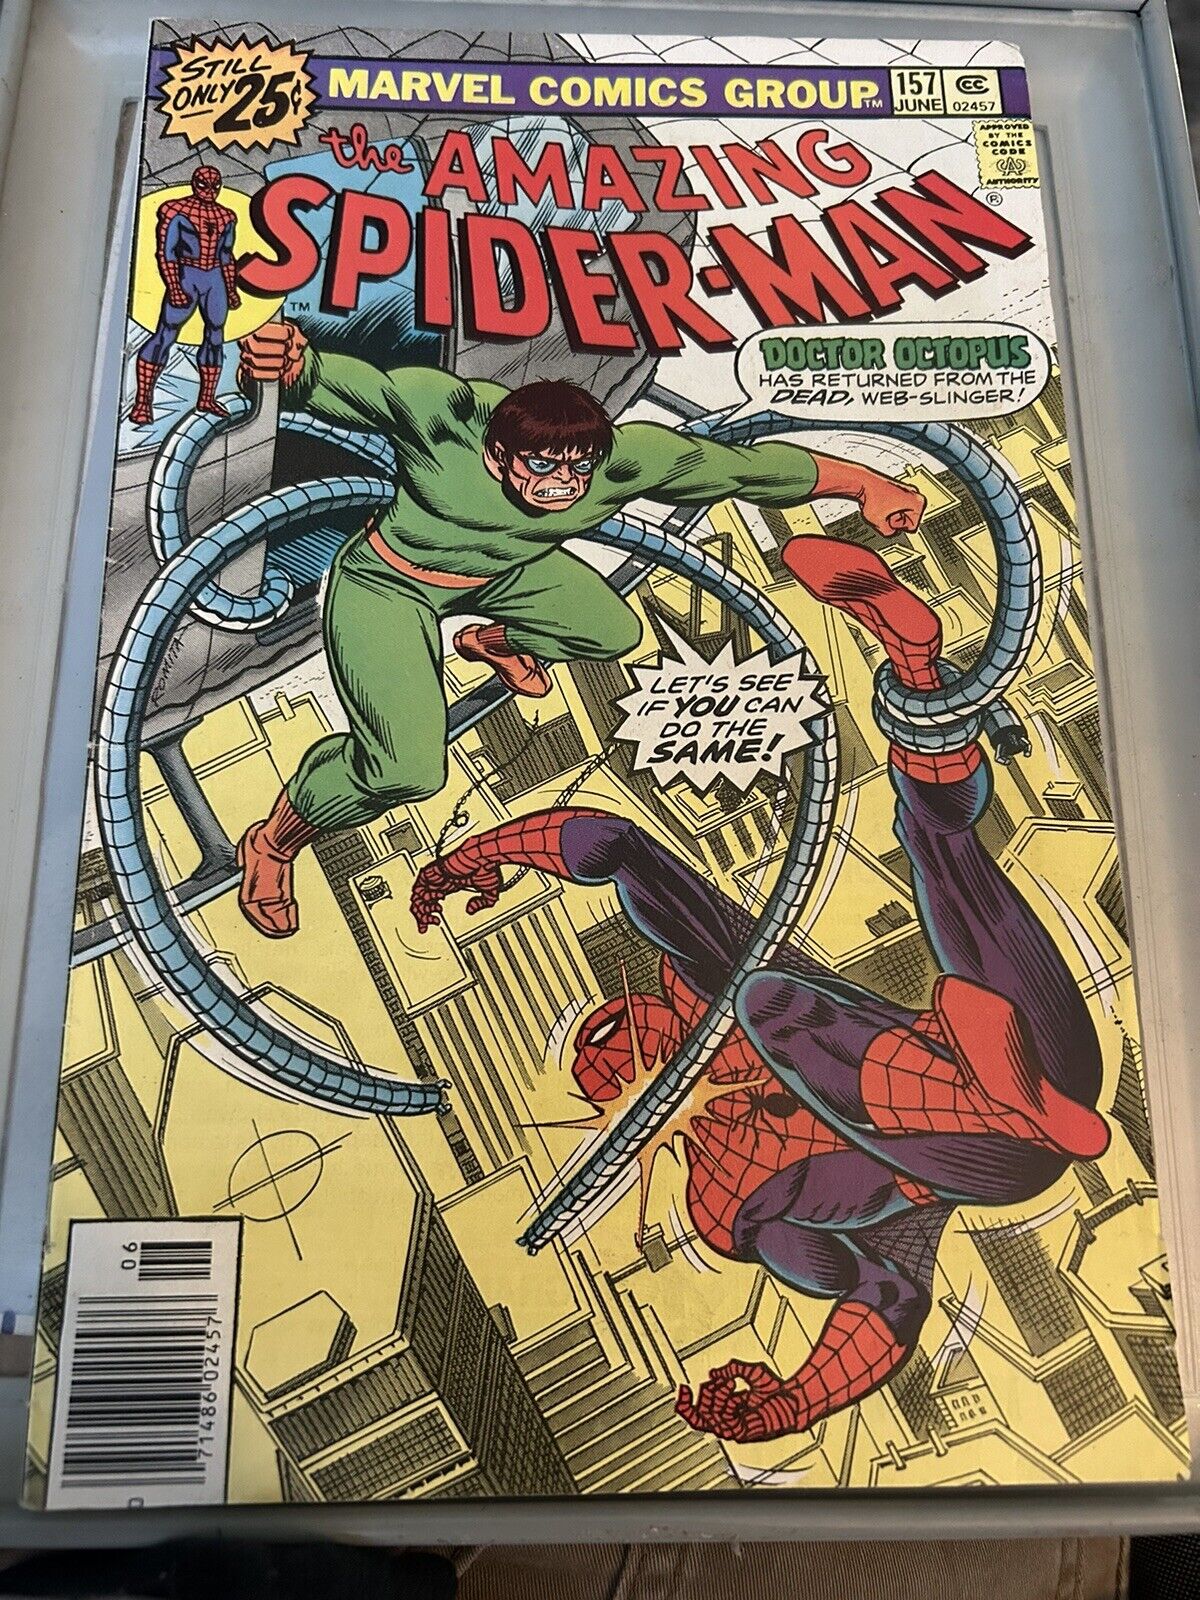 The Amazing Spiderman #157 ,  Doctor Octopus  1976  6.5 White Pg Variation.